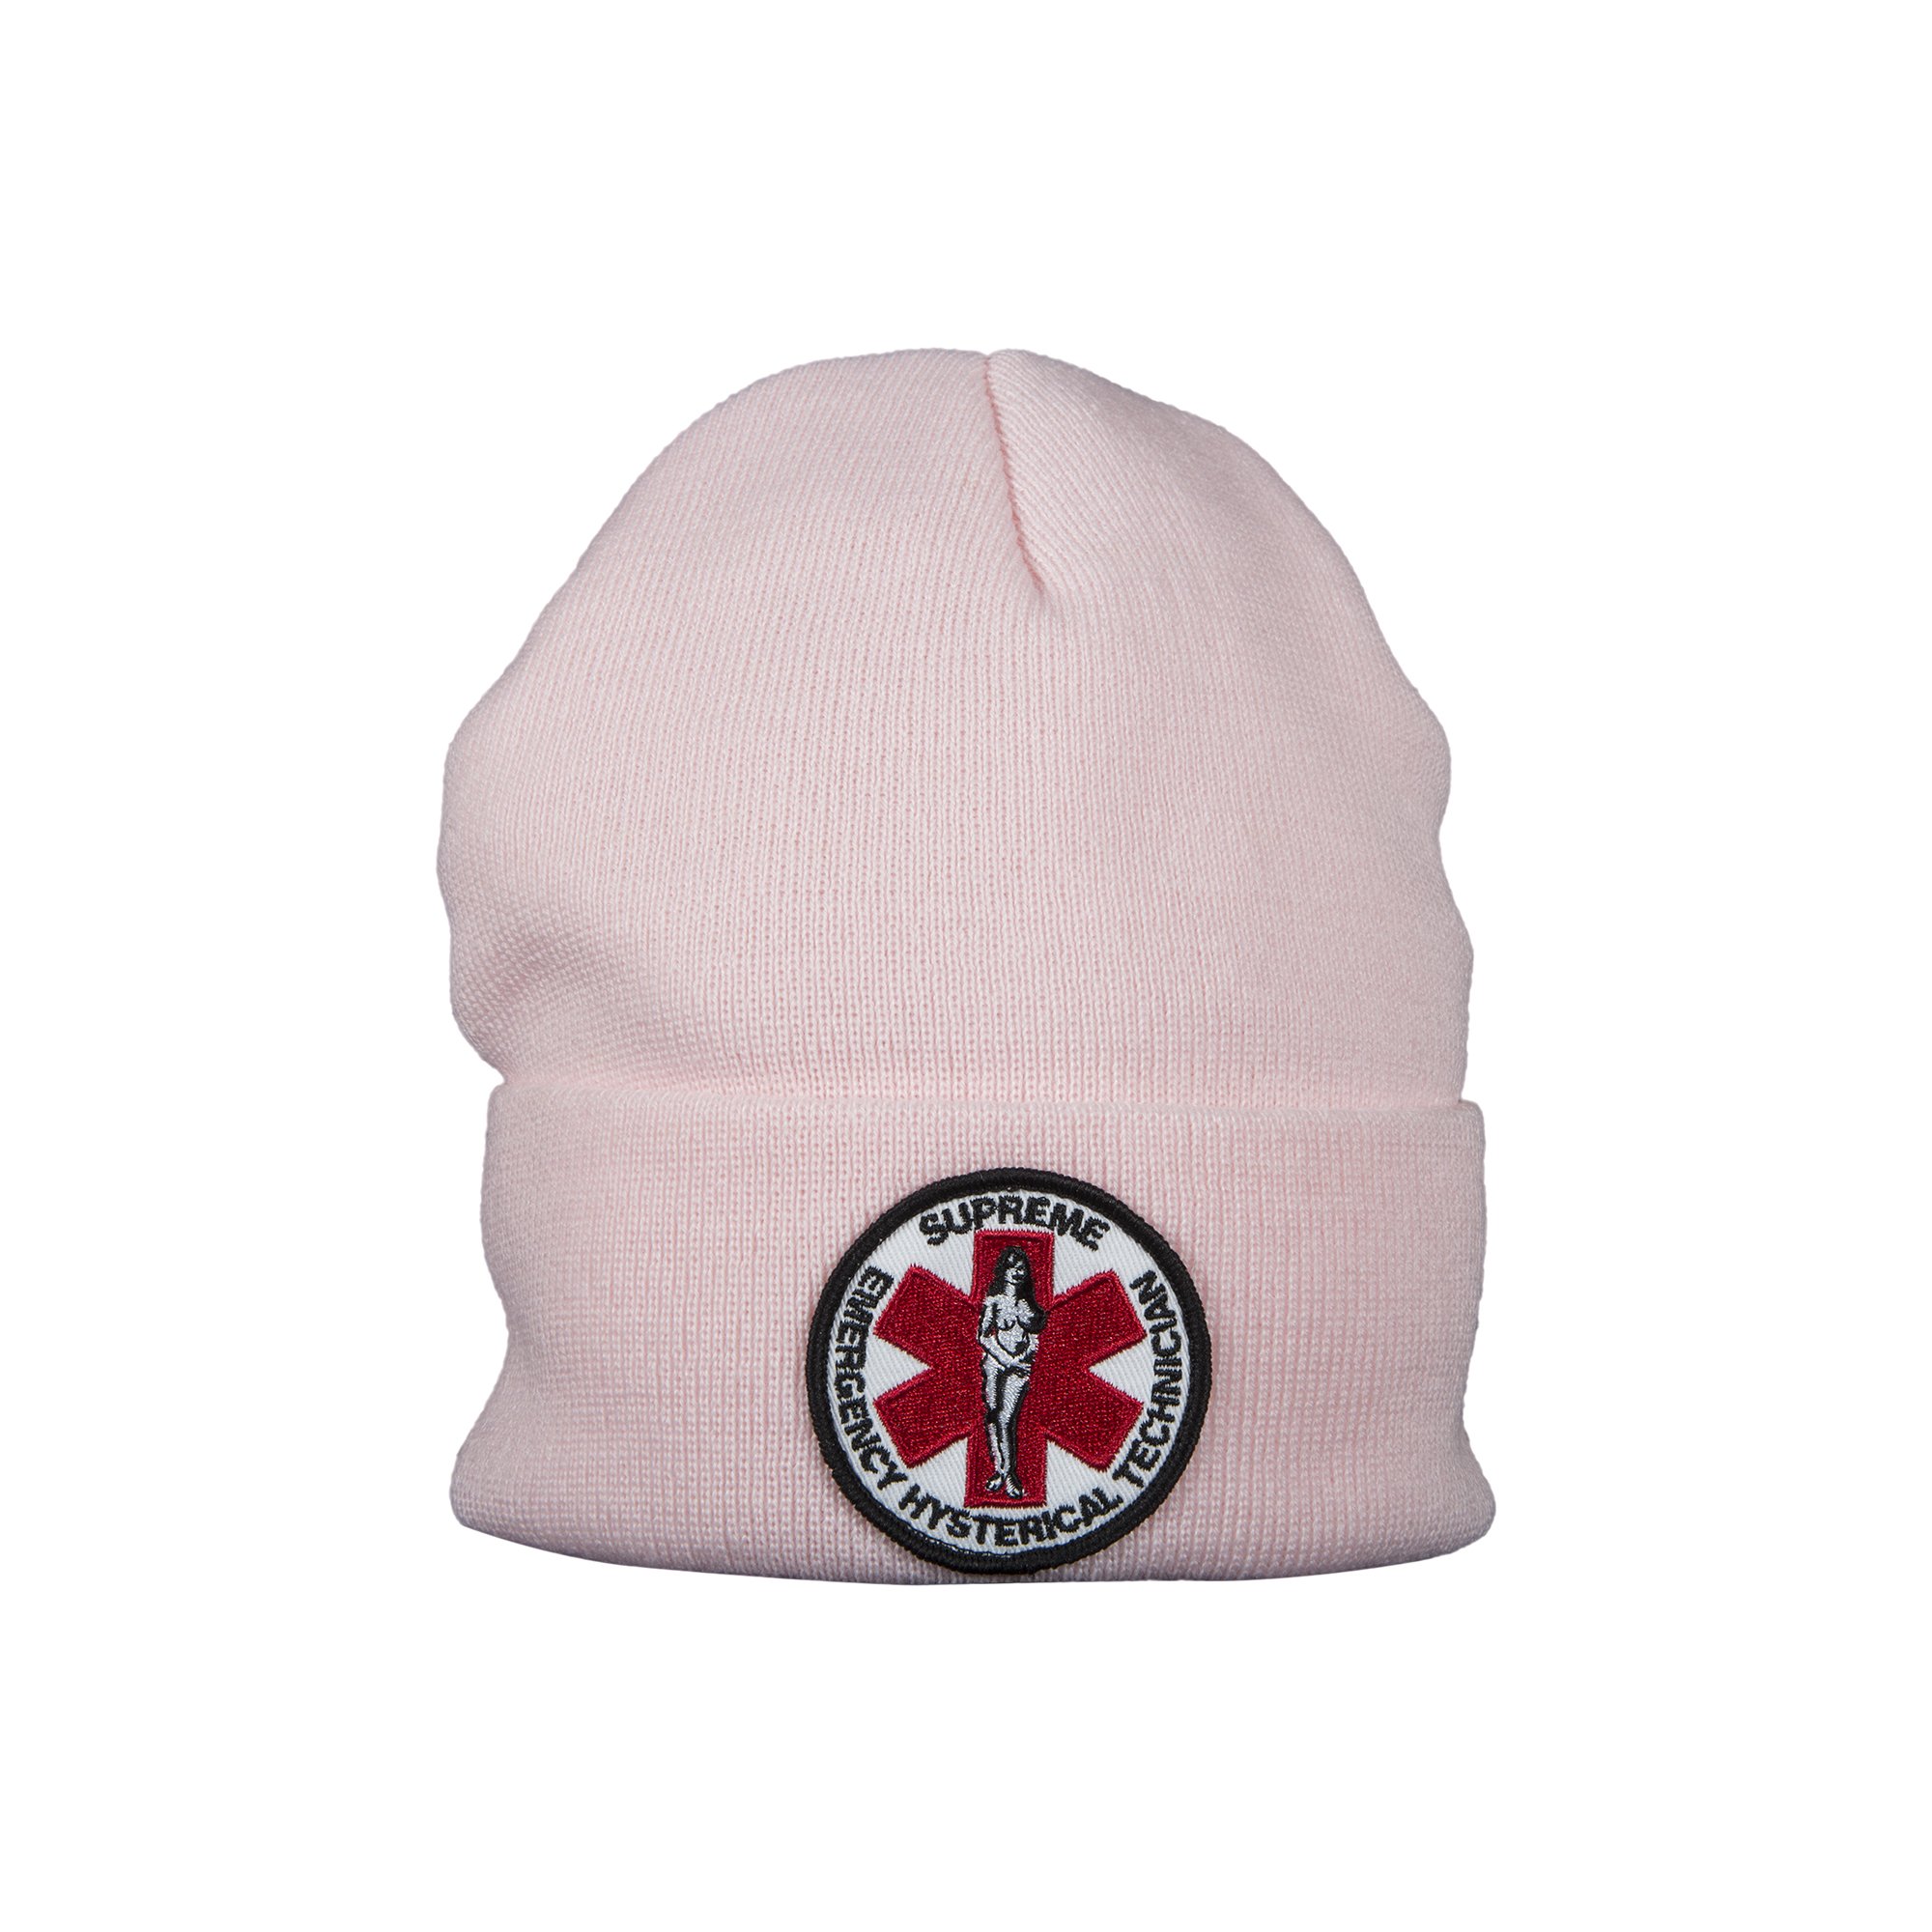 Buy Supreme x Hysteric Glamour Beanie 'Pink' - FW17BN12 PINK | GOAT CA